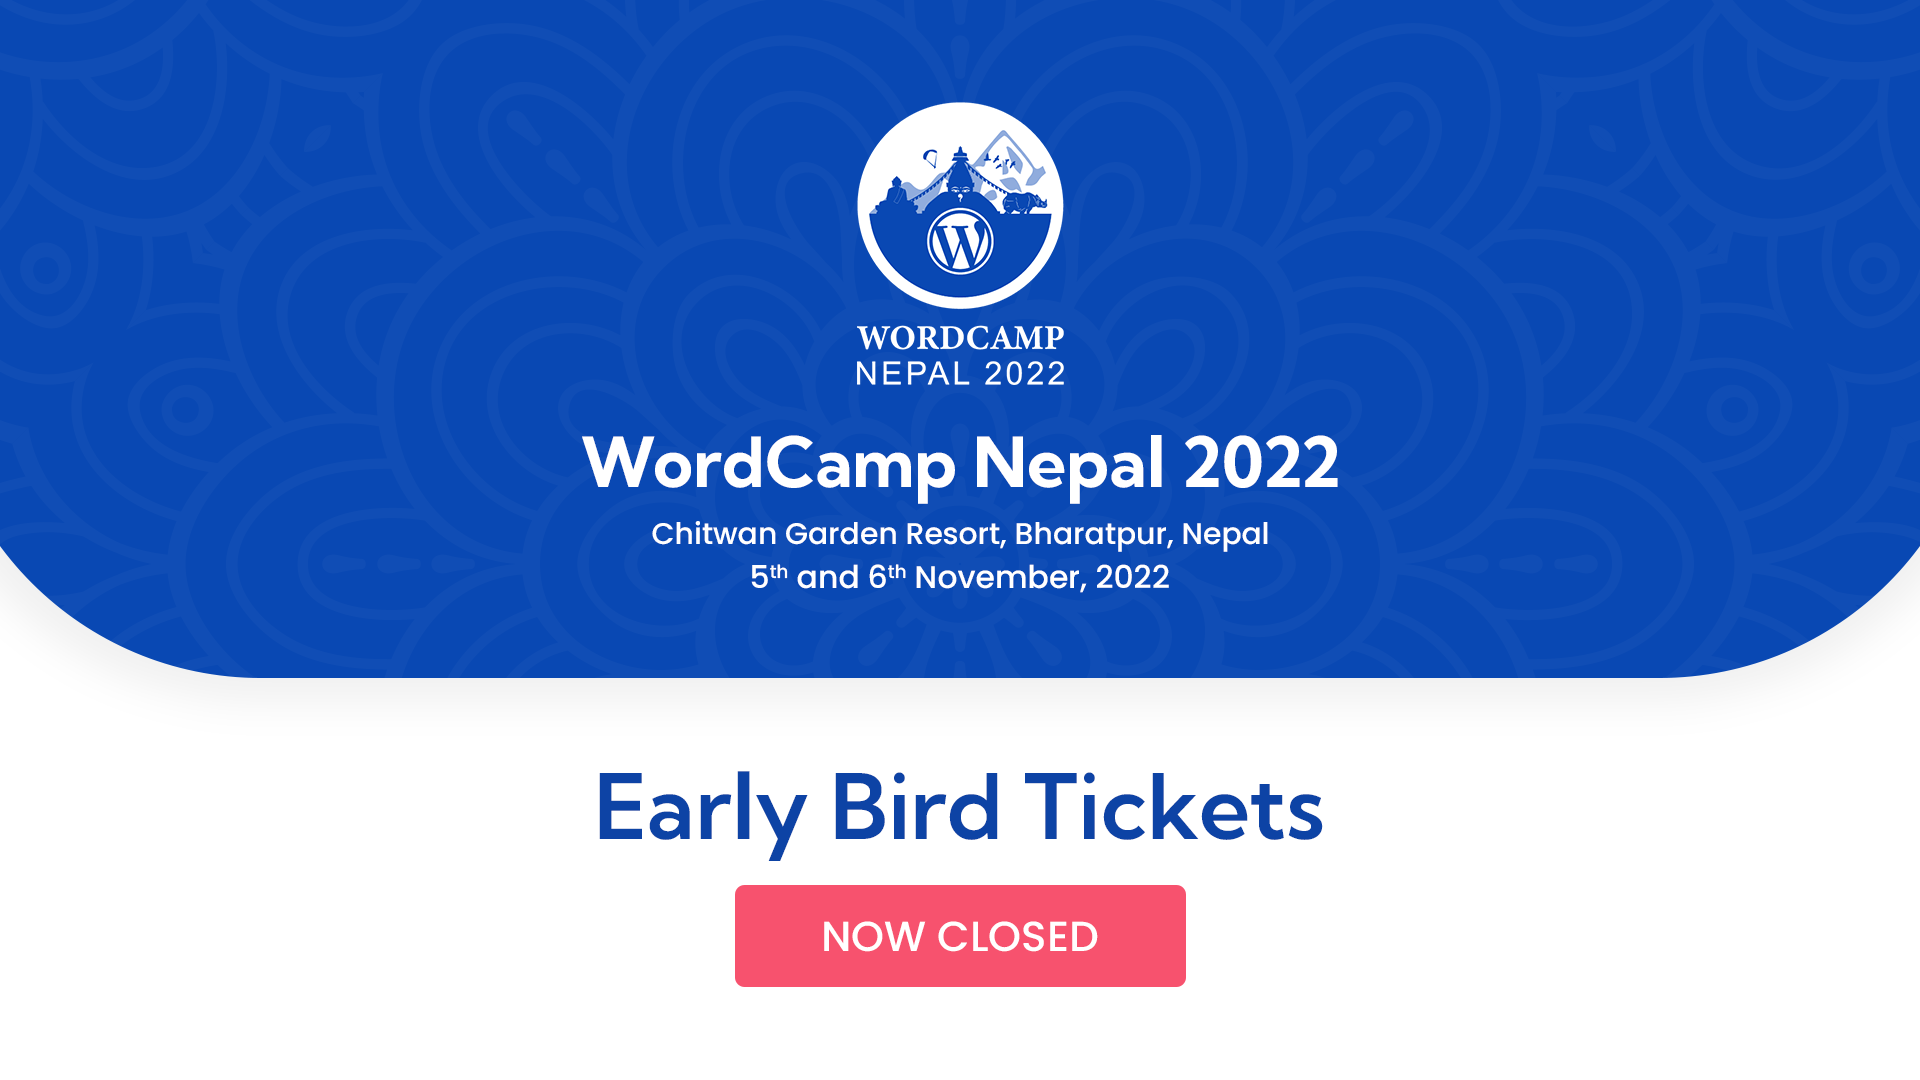 Early Bird Tickets are now closed